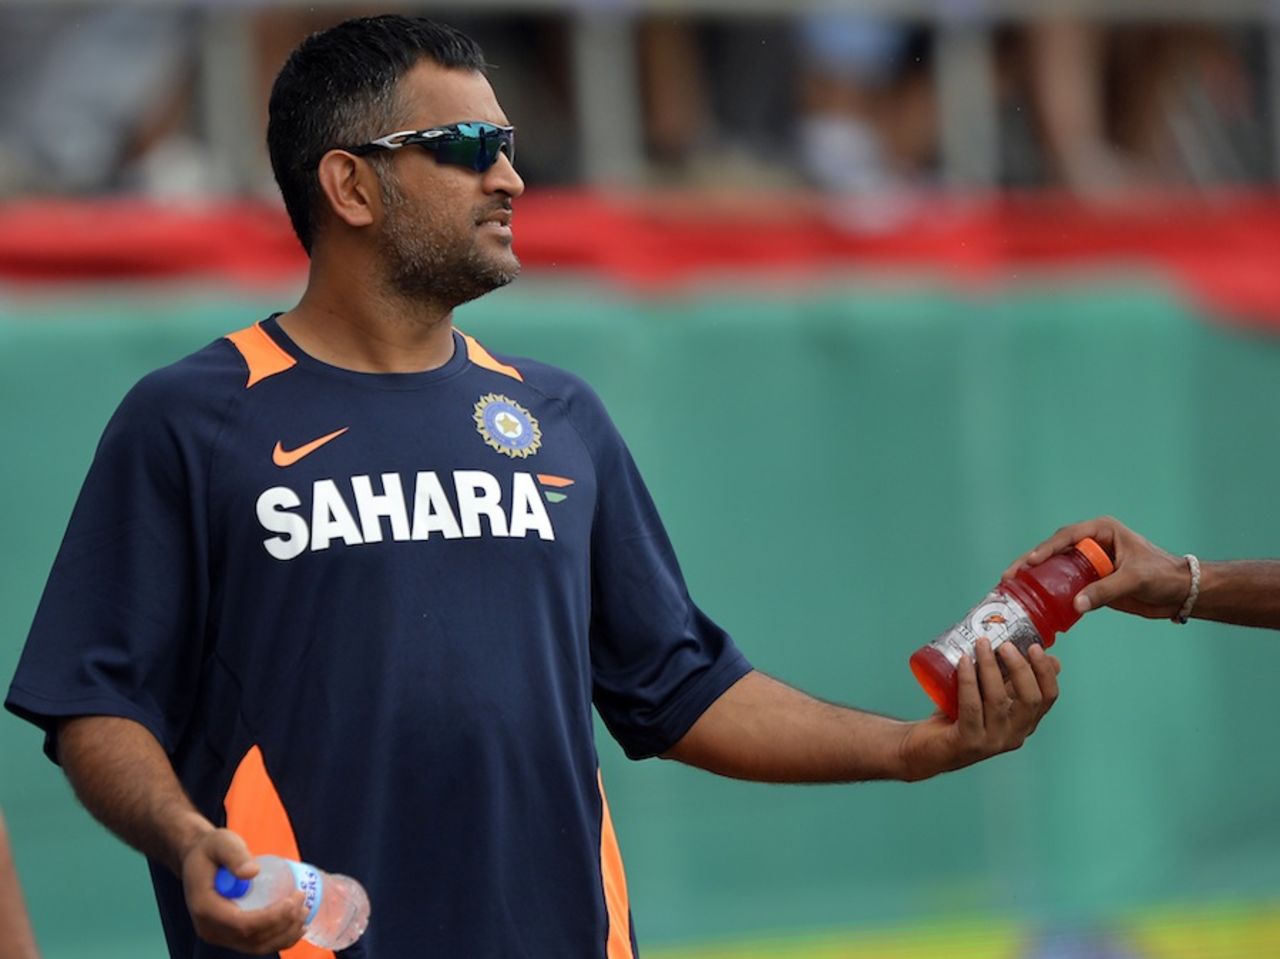 MS Dhoni gives drinks to his team-mates, West Indies v India, West Indies tri-series, Port of Spain, July 5, 2013